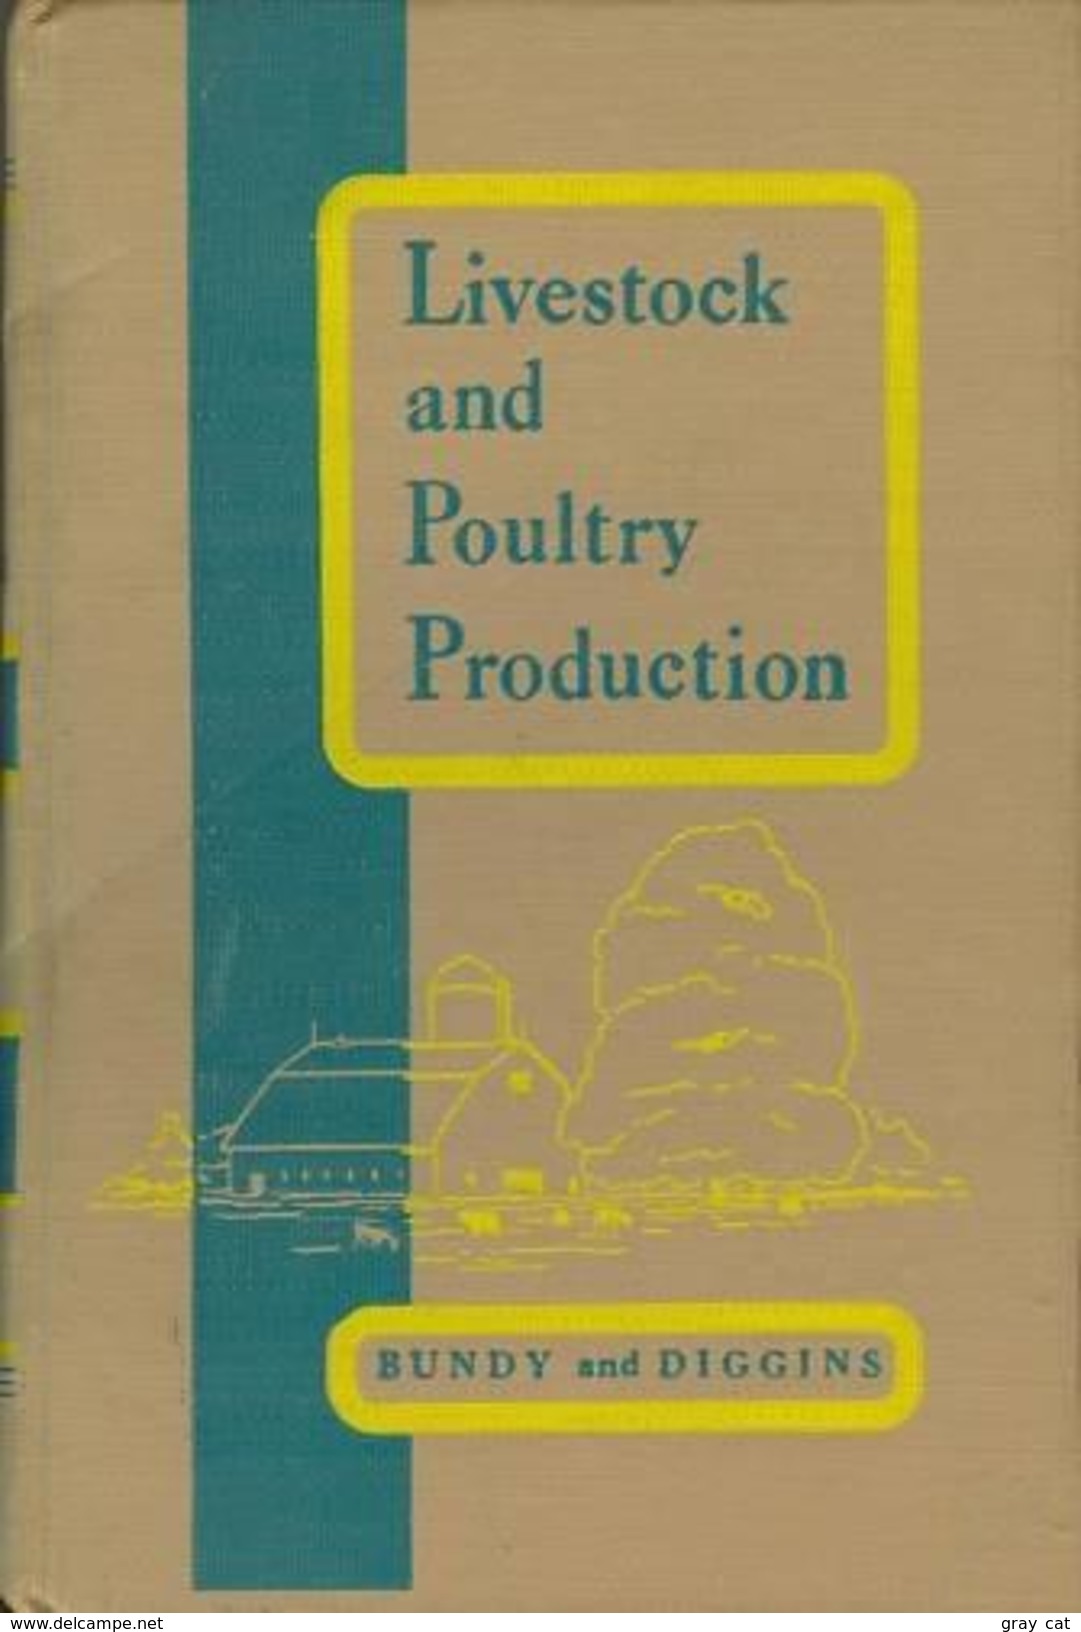 Livestock And Poultry Production: Principles And Practices By Clarence E. Bundy & Ronald V. Diggins - 1950-Heute